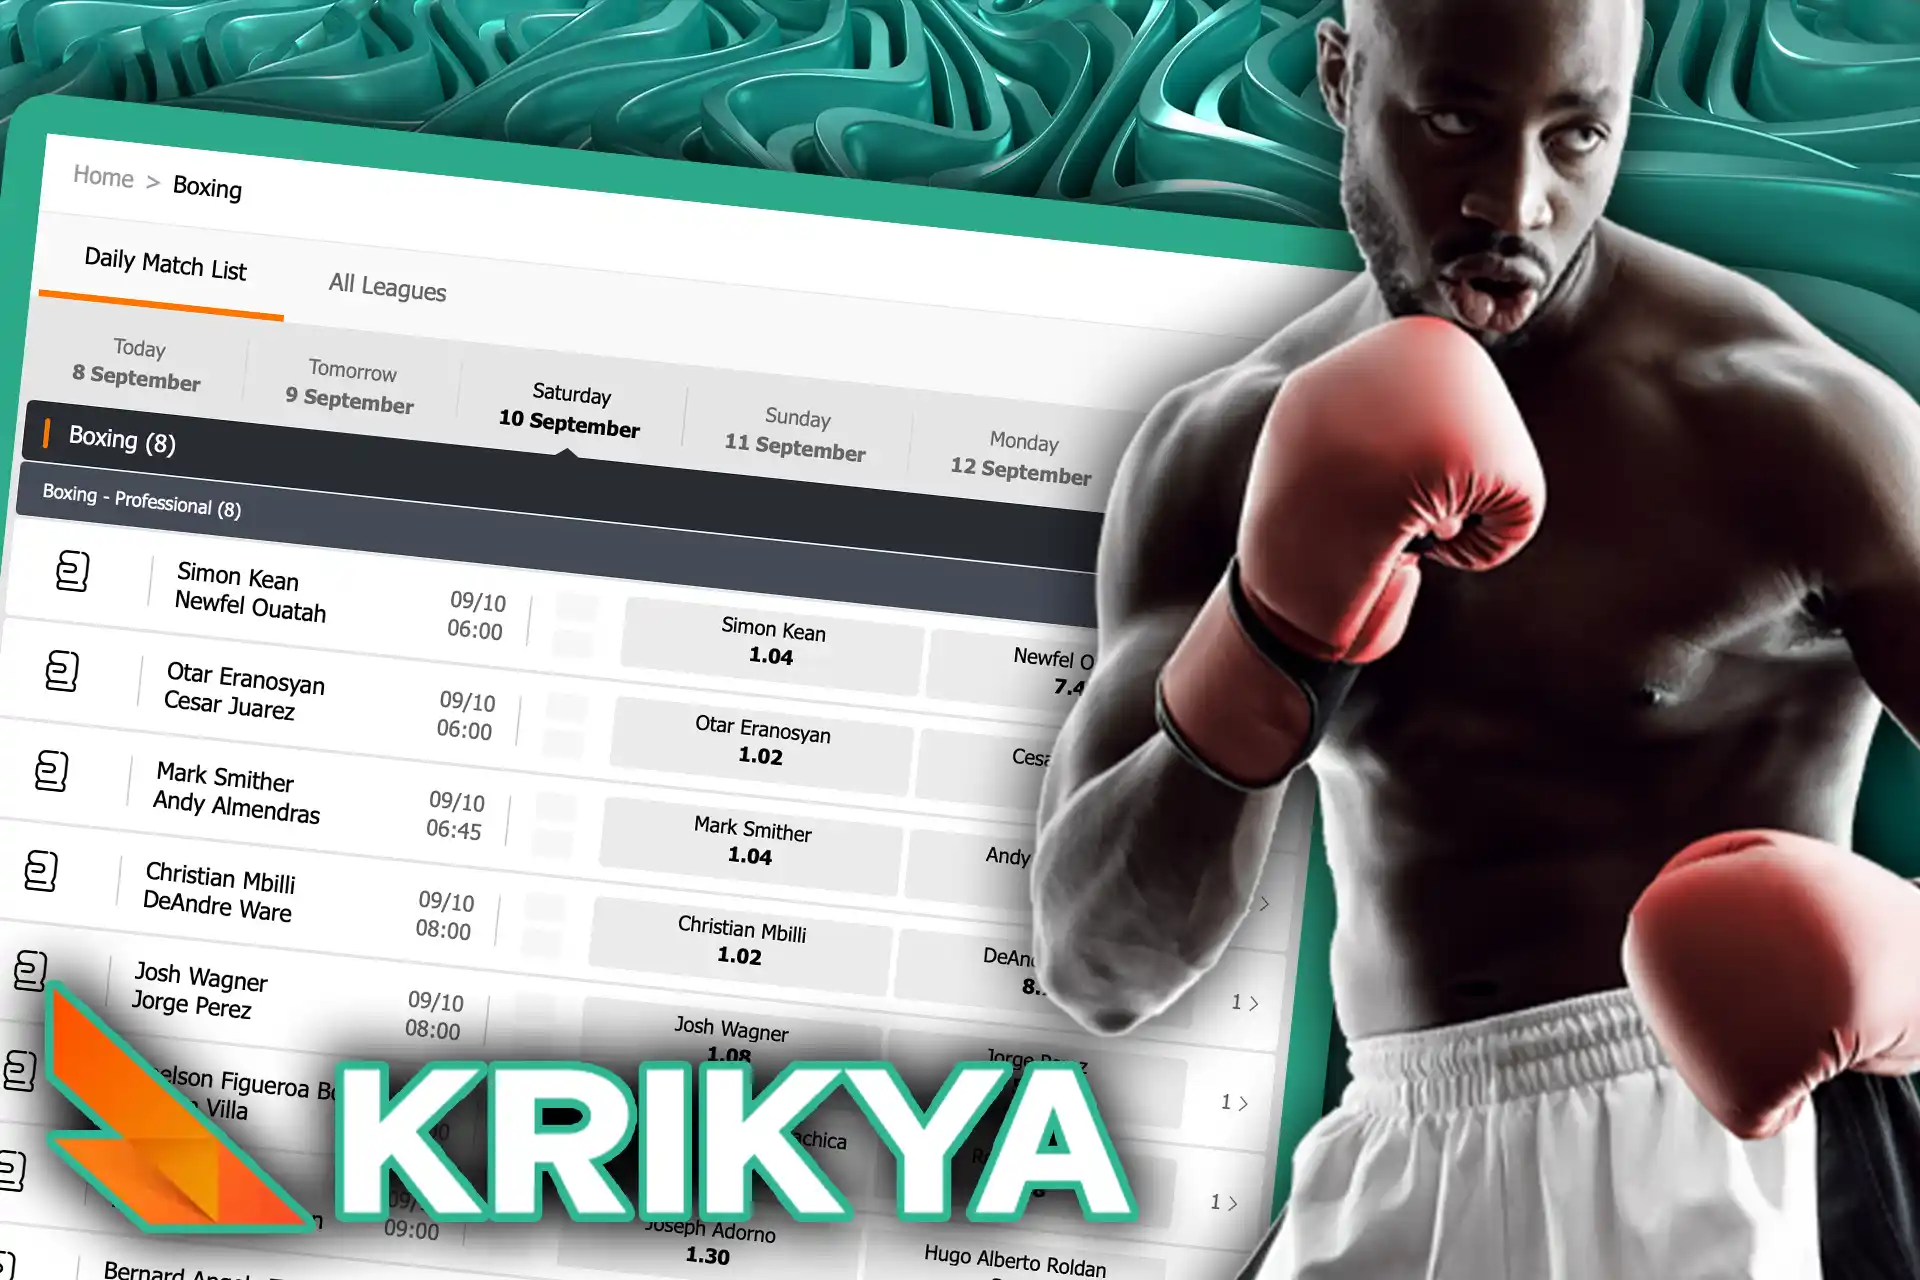 You'll find many deifferent markets on boxing betting at Krikya.